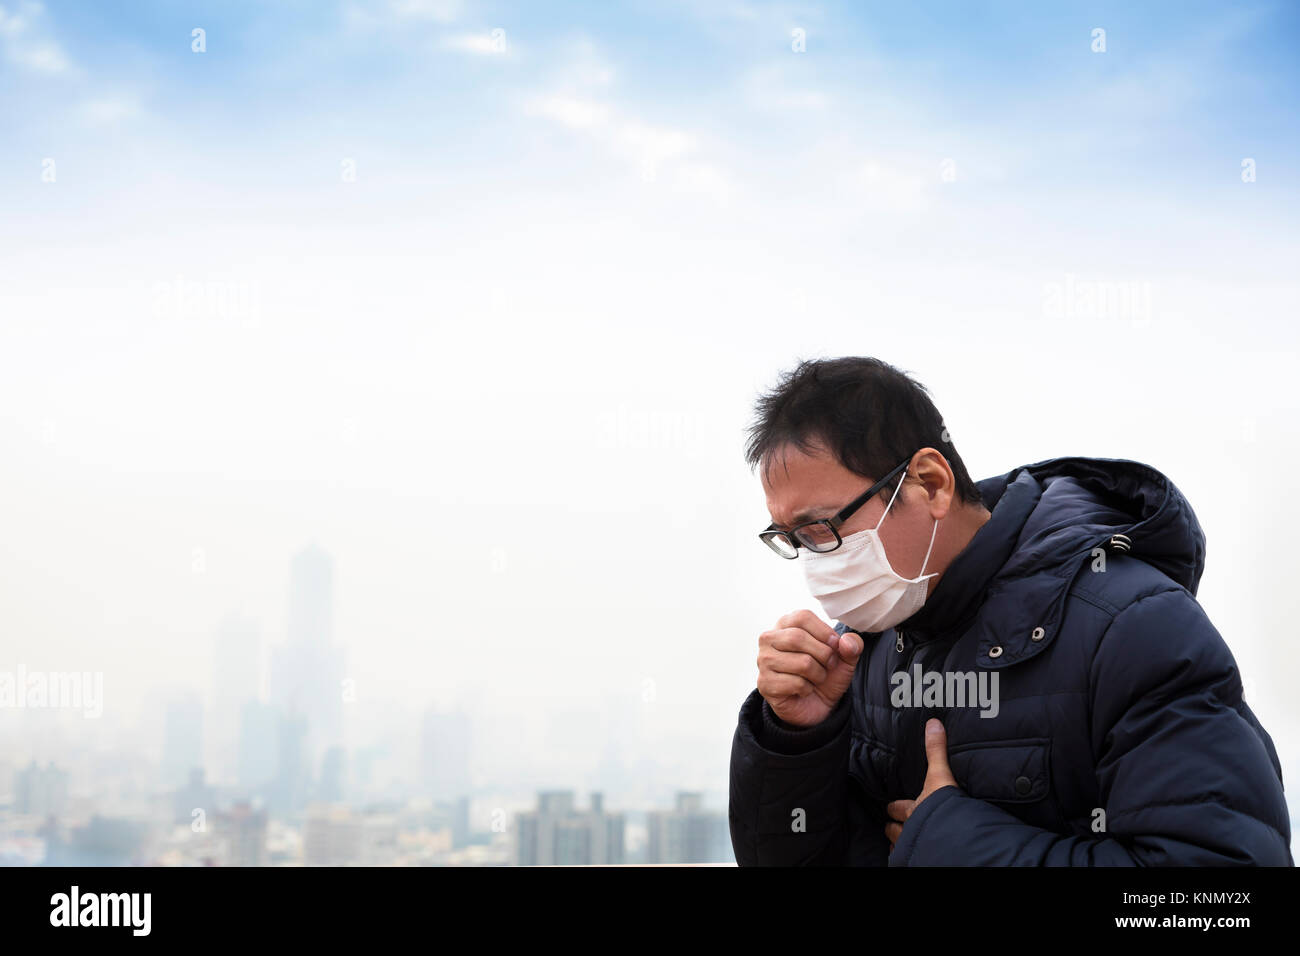 Lung cancer patients with smog city background Stock Photo